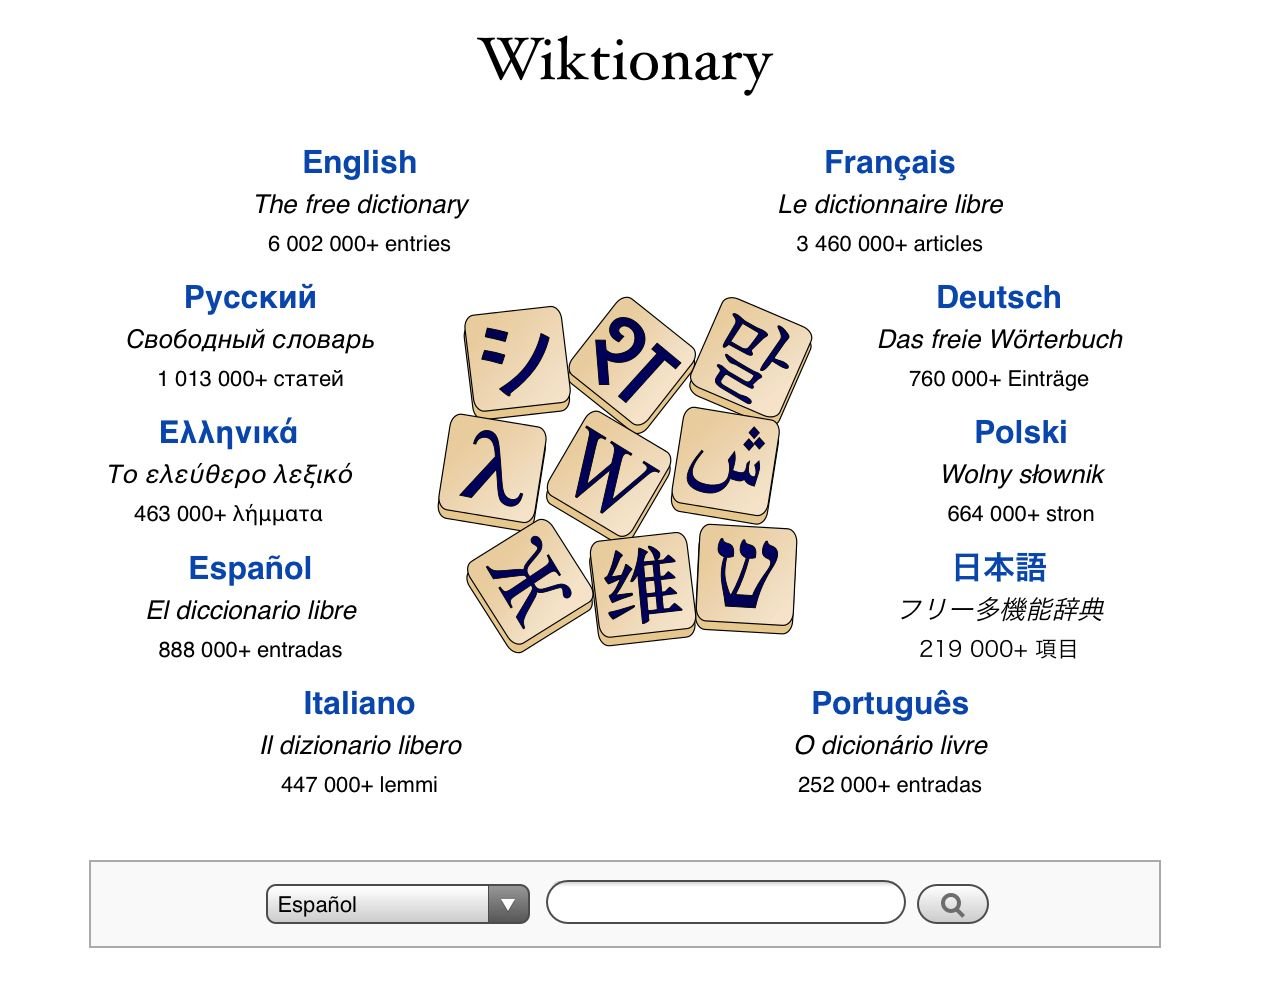 △ - Wiktionary, the free dictionary